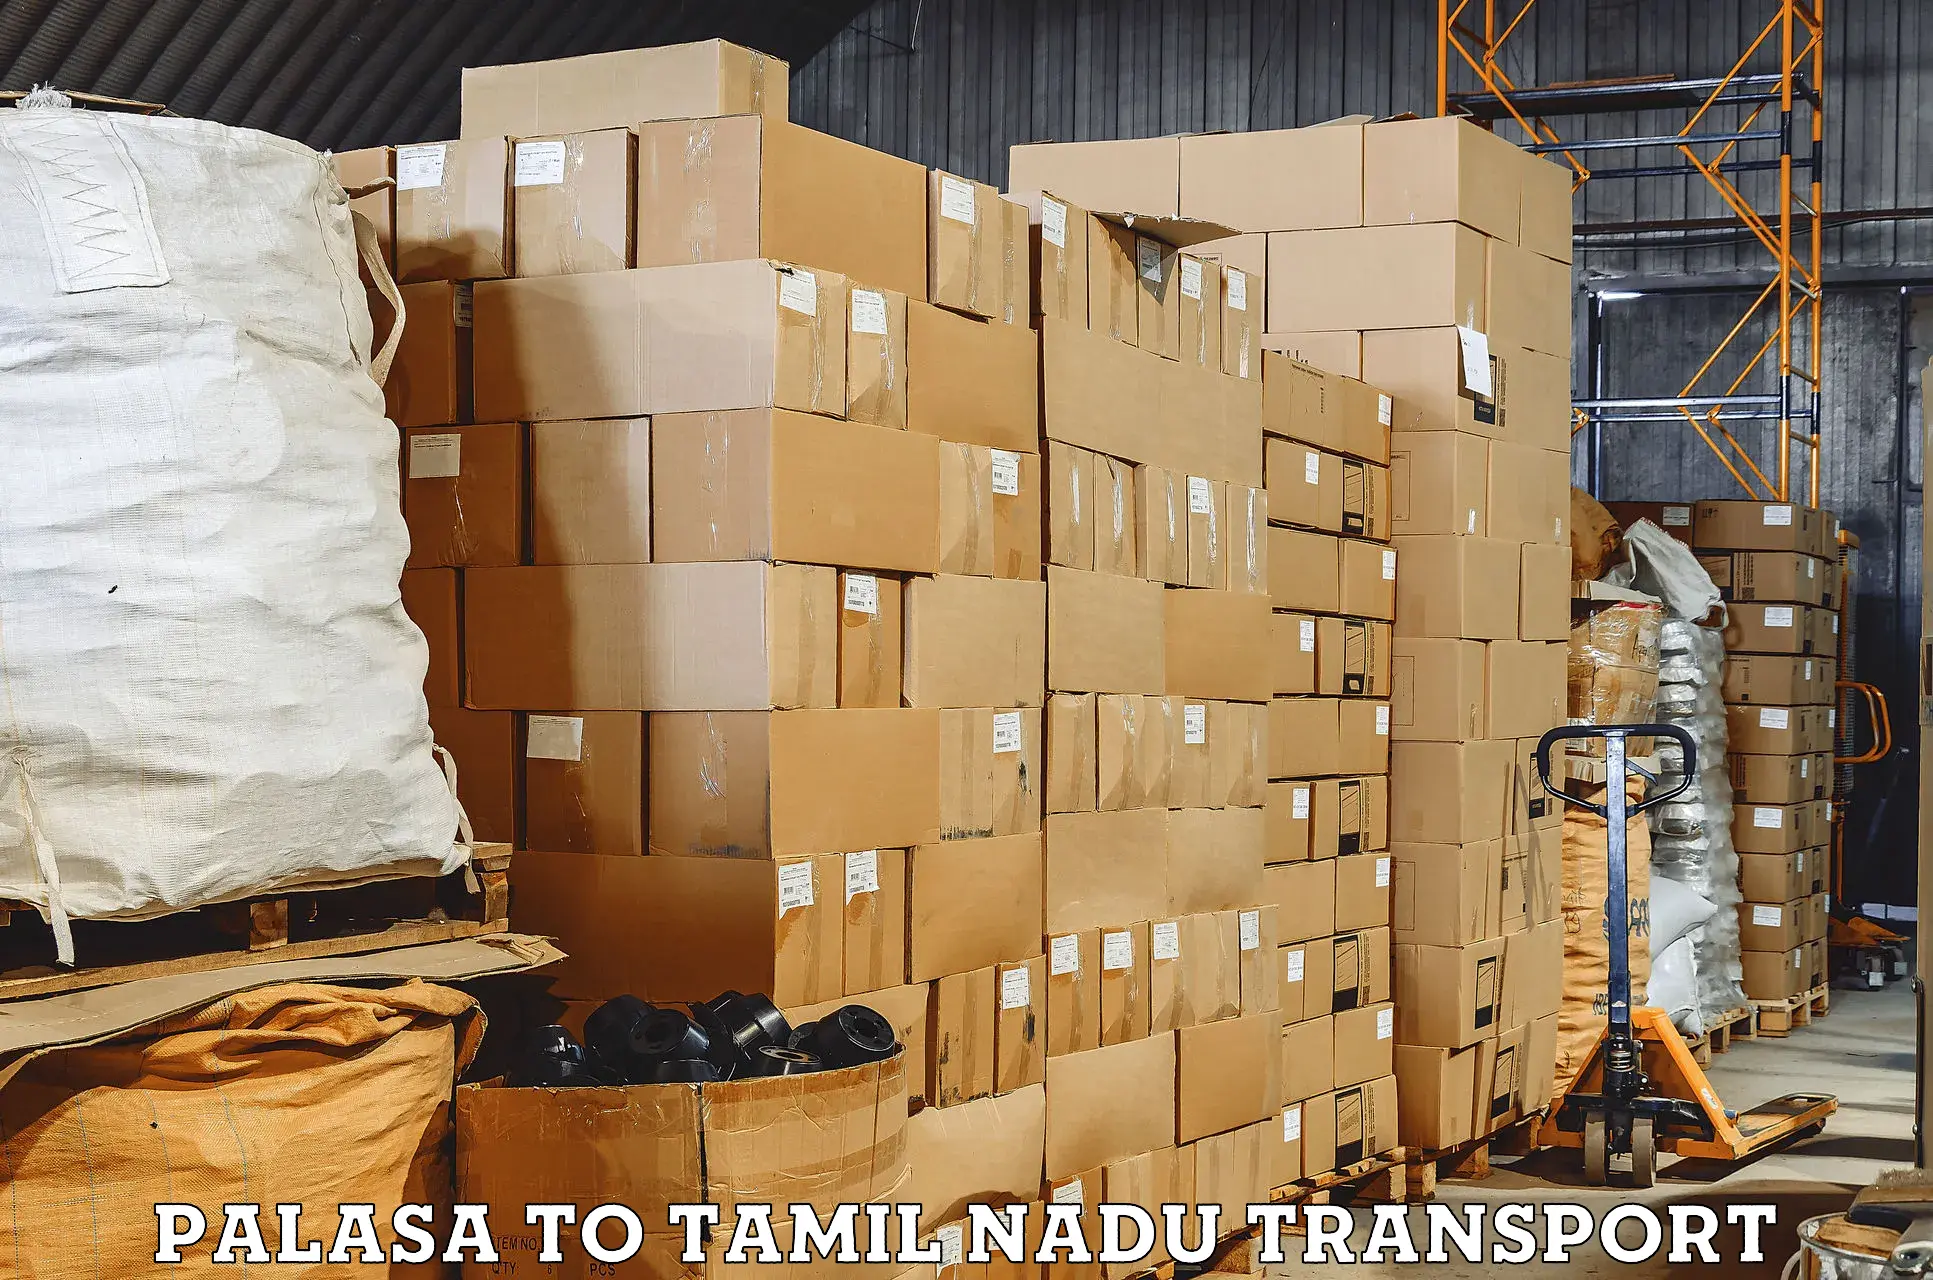 Daily parcel service transport Palasa to Ennore Port Chennai